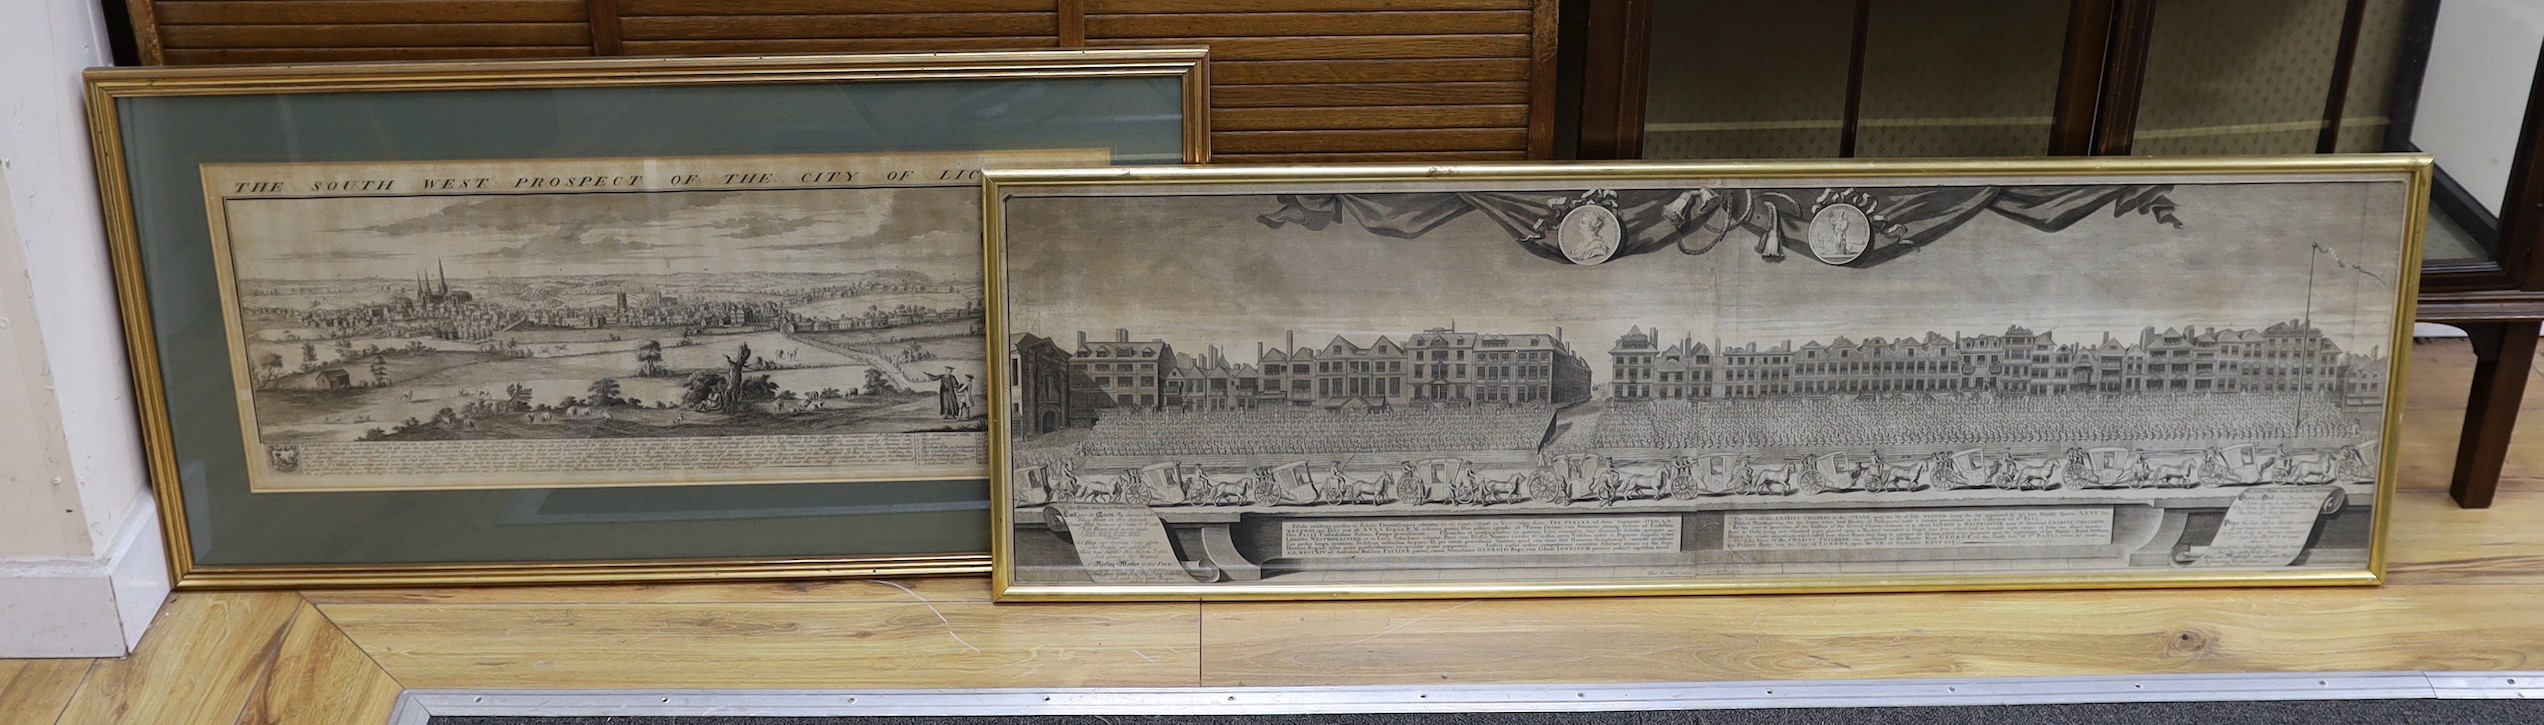 George Vertue, engraving, ‘View of the charity children in The Strand … 1715’, 39 x 128cm and a Buck engraving, South West Prospect of the City of Lichfield, 32 x 80cm                                                     